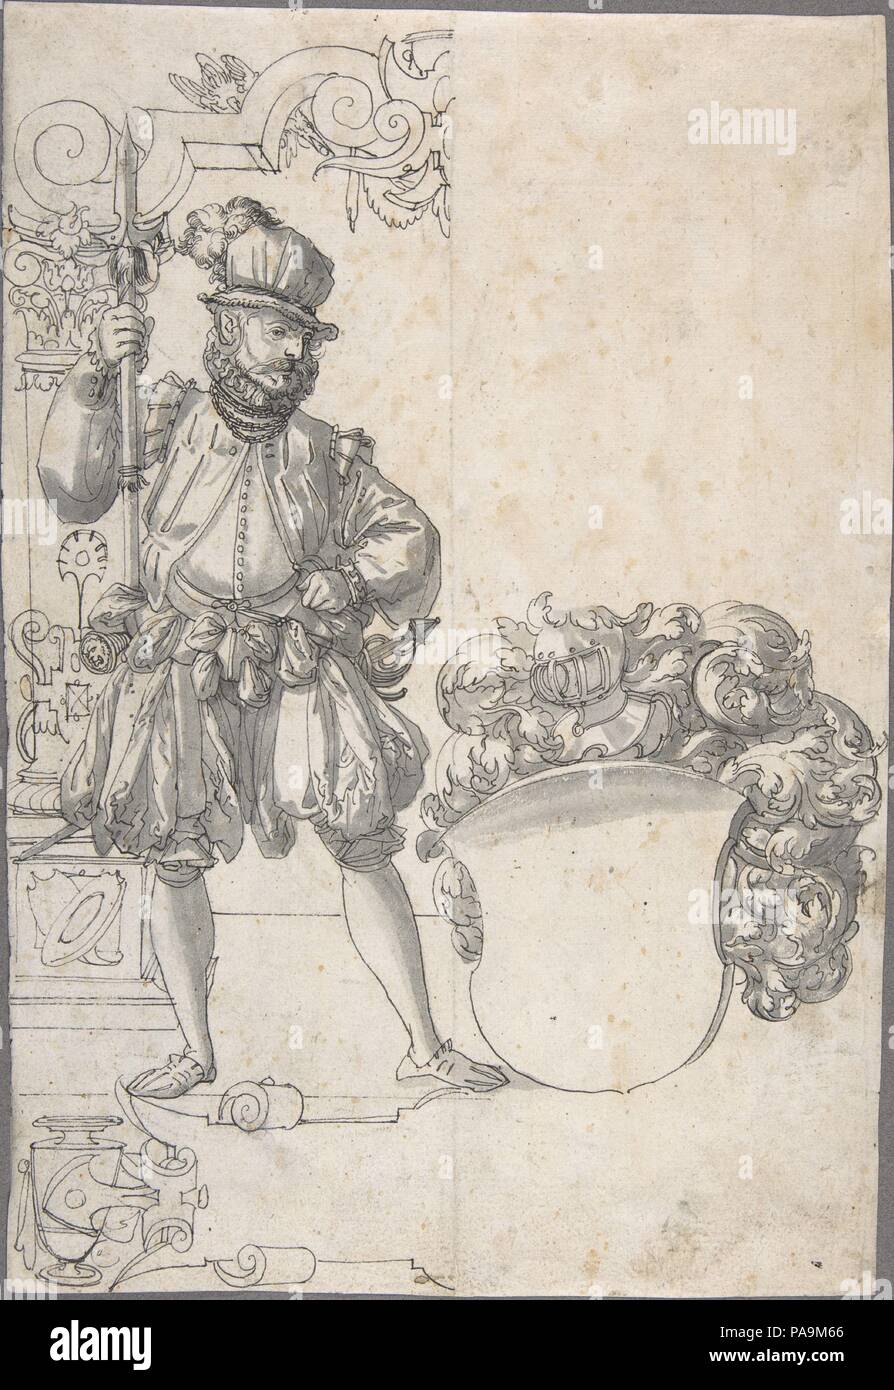 Design for Stained Glass: A Halbardier by an Unfinished Coat of Arms. Artist: Hans Jakob Plepp (Swiss, Biel ca. 1557/60-ca. 1597/98 Bern). Dimensions: 12 1/8 x 8 5/16 in.  (30.8 x 21.1 cm). Date: ca. 1570-80. Museum: Metropolitan Museum of Art, New York, USA. Stock Photo